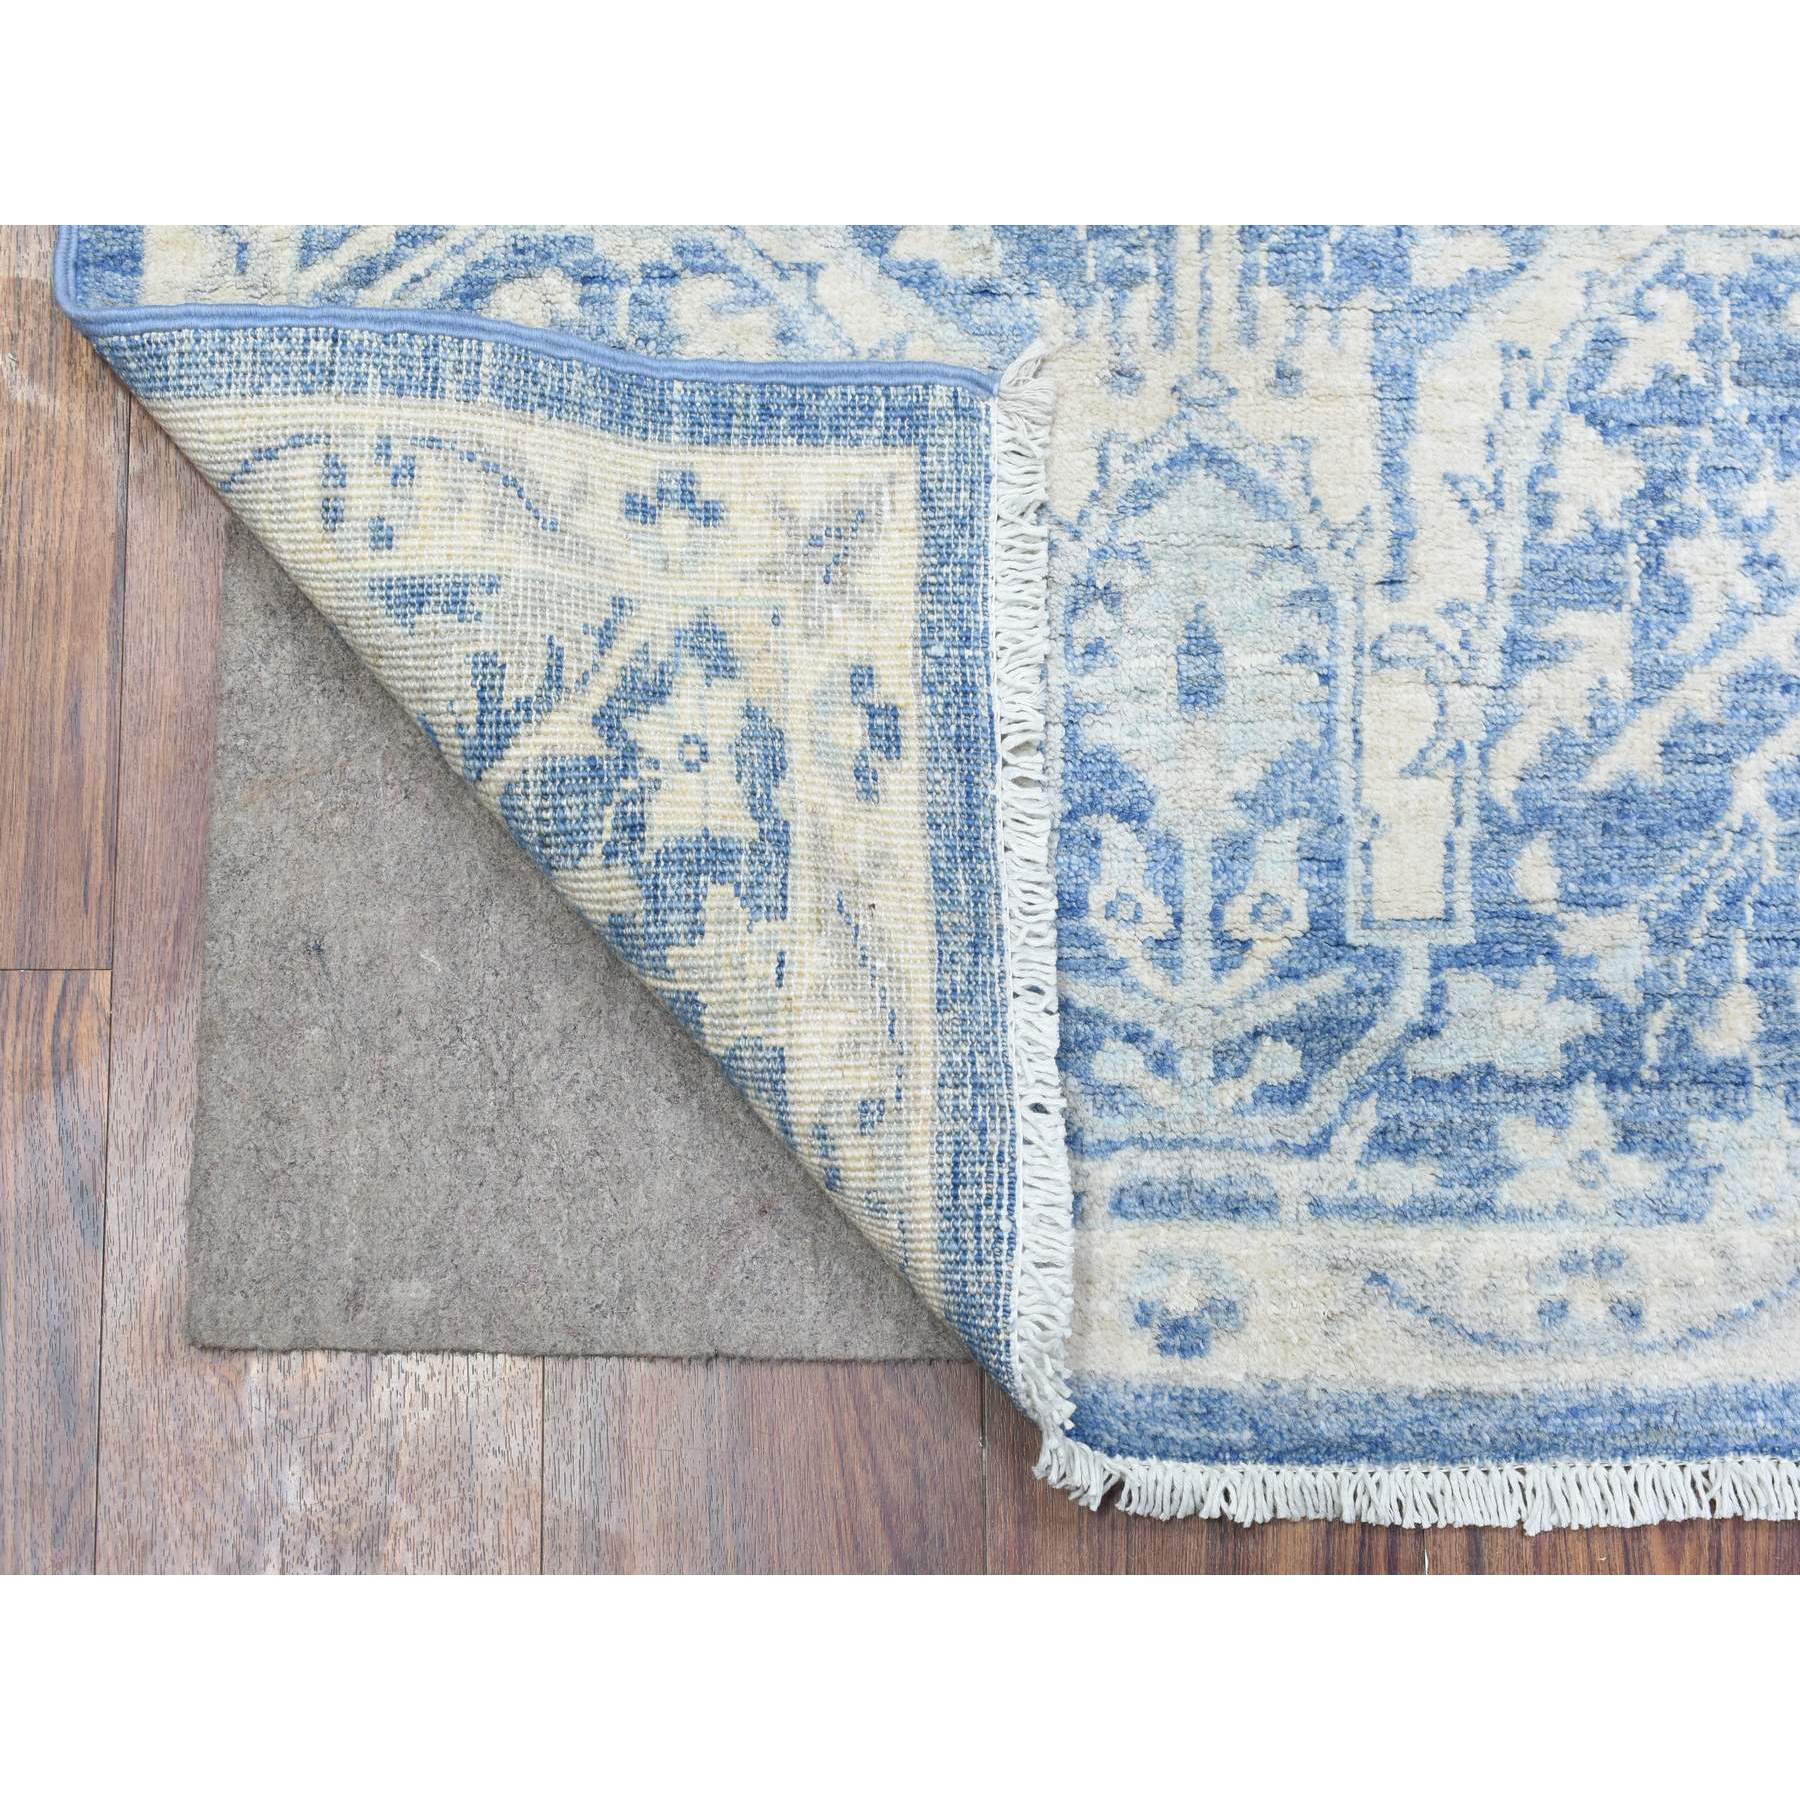 2'7"x7'7" Denim Blue, Soft Organic Wool Hand Woven, White Wash Peshawar with All Over Leaf Design Natural Dyes, Runner Oriental Rug 